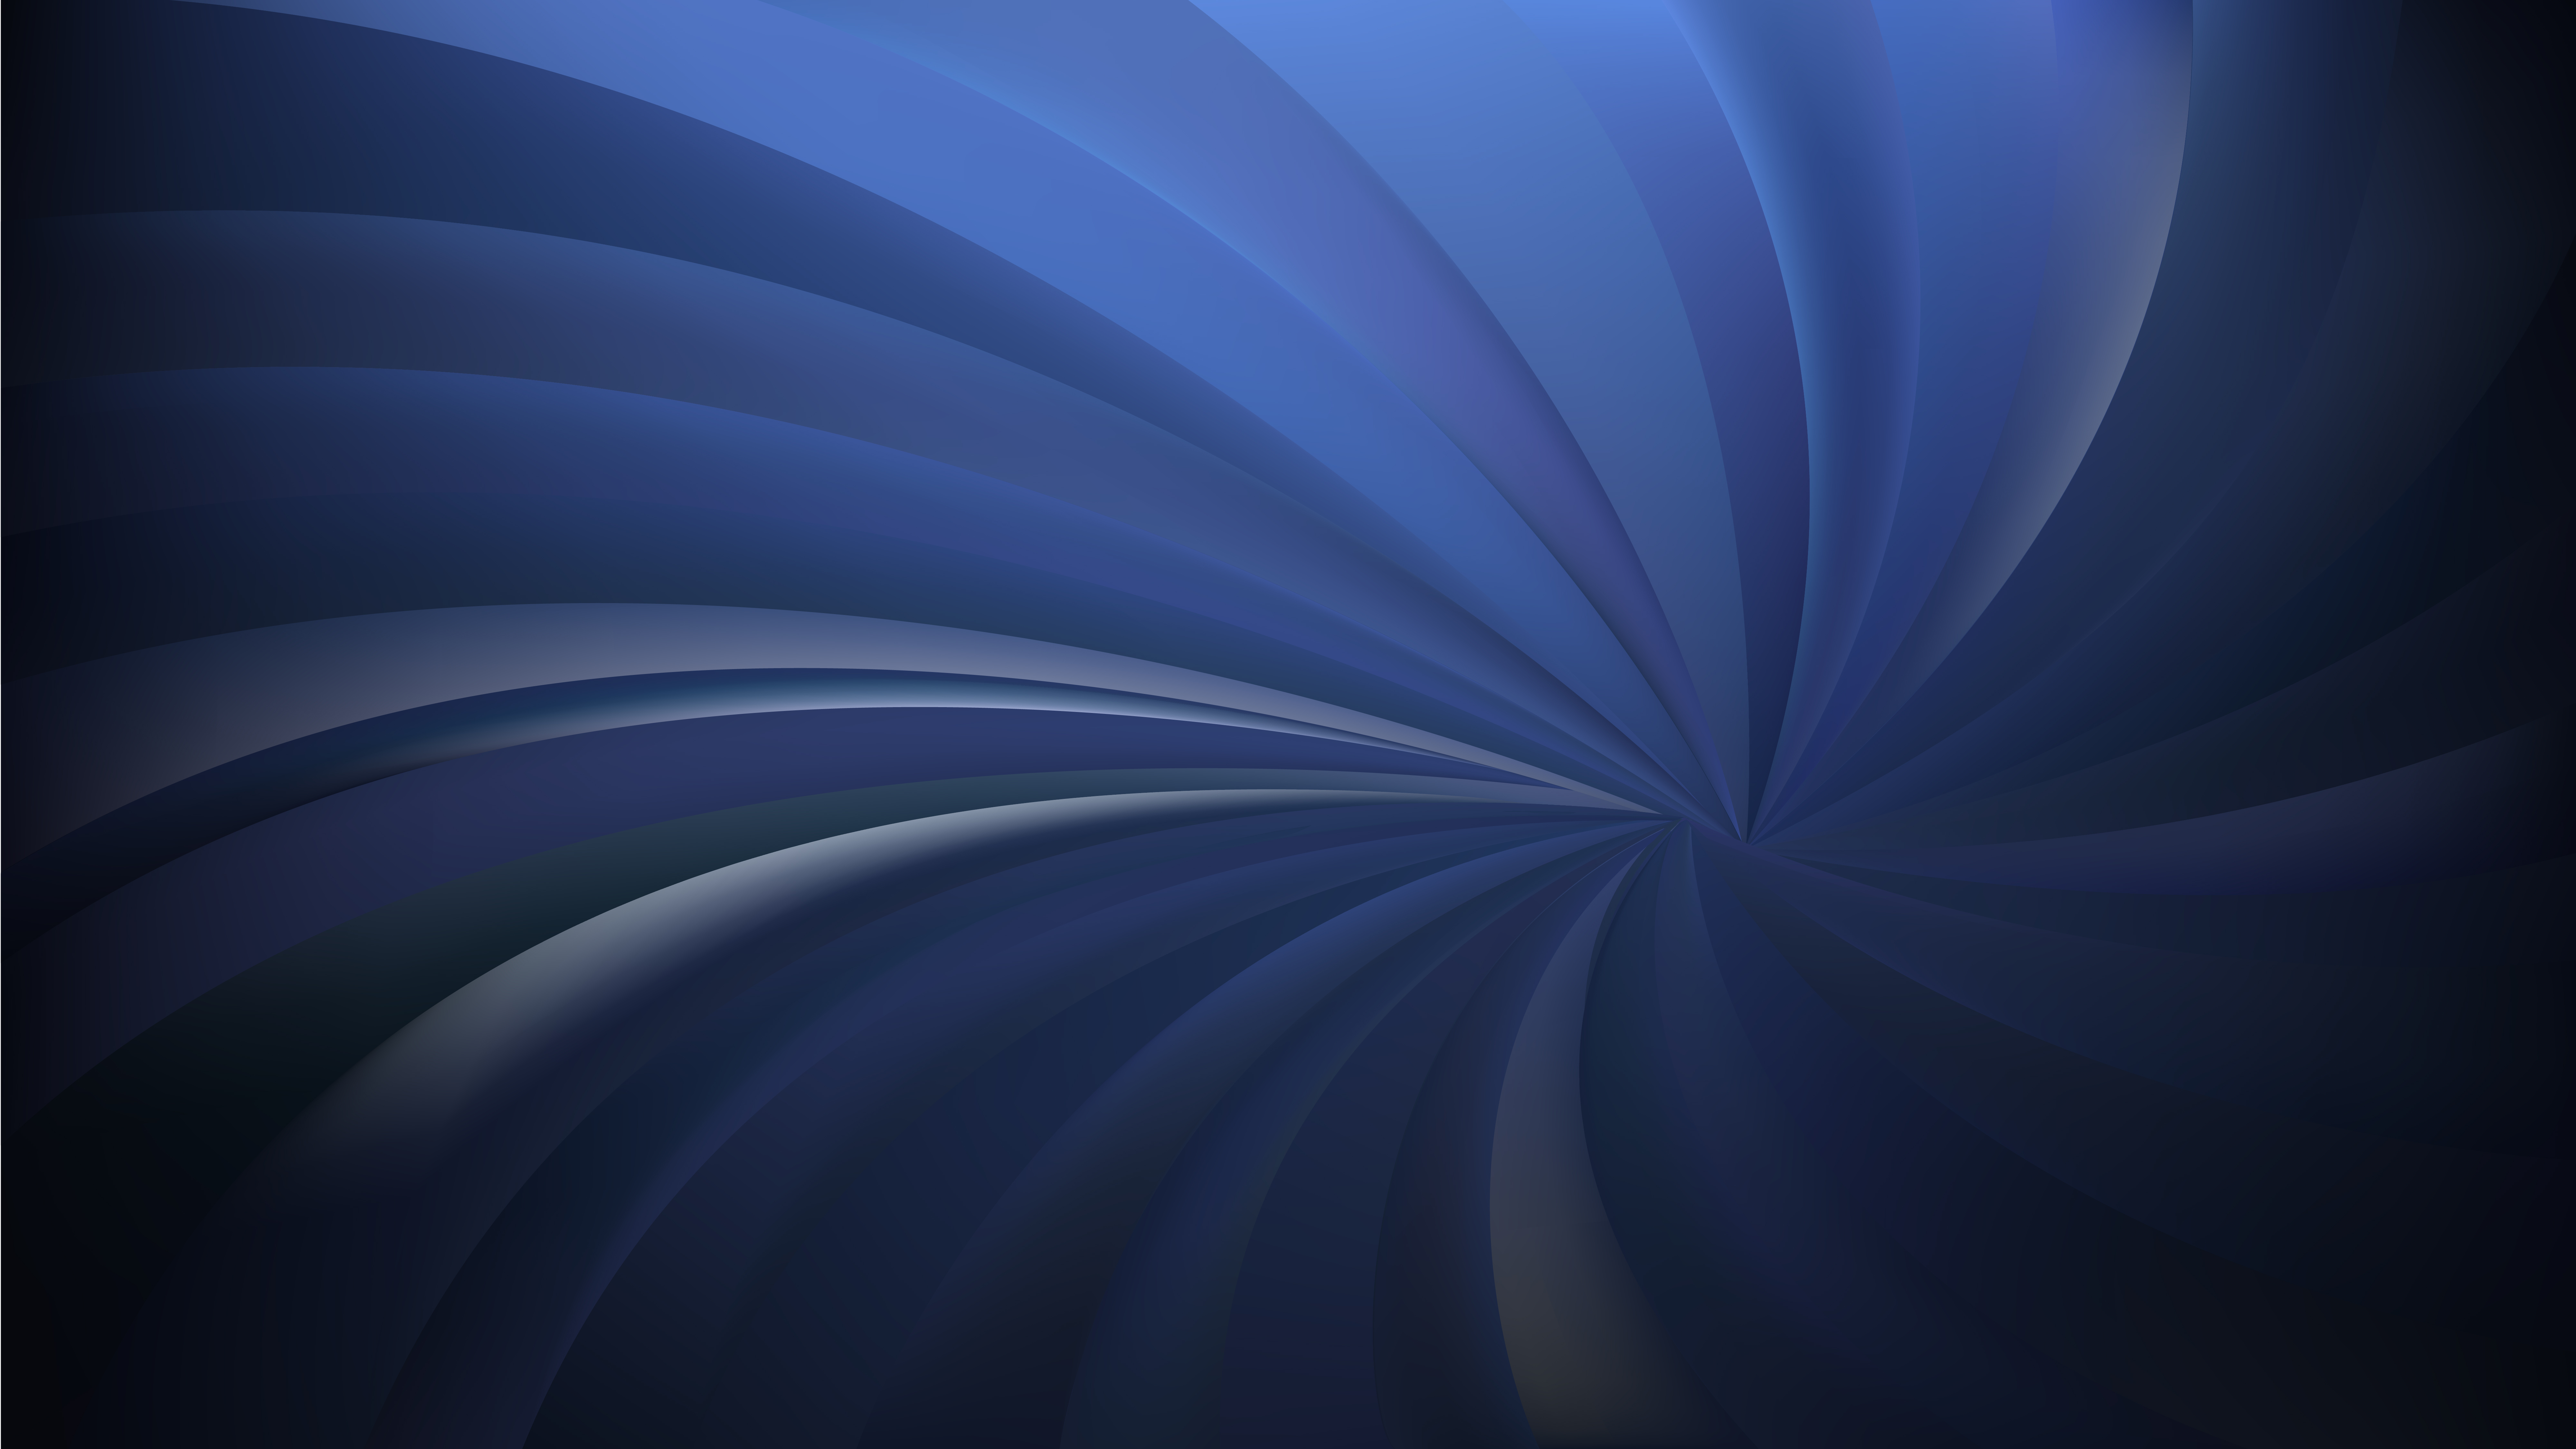 Abstract Black And Blue Twist Swirl Rays Background Image